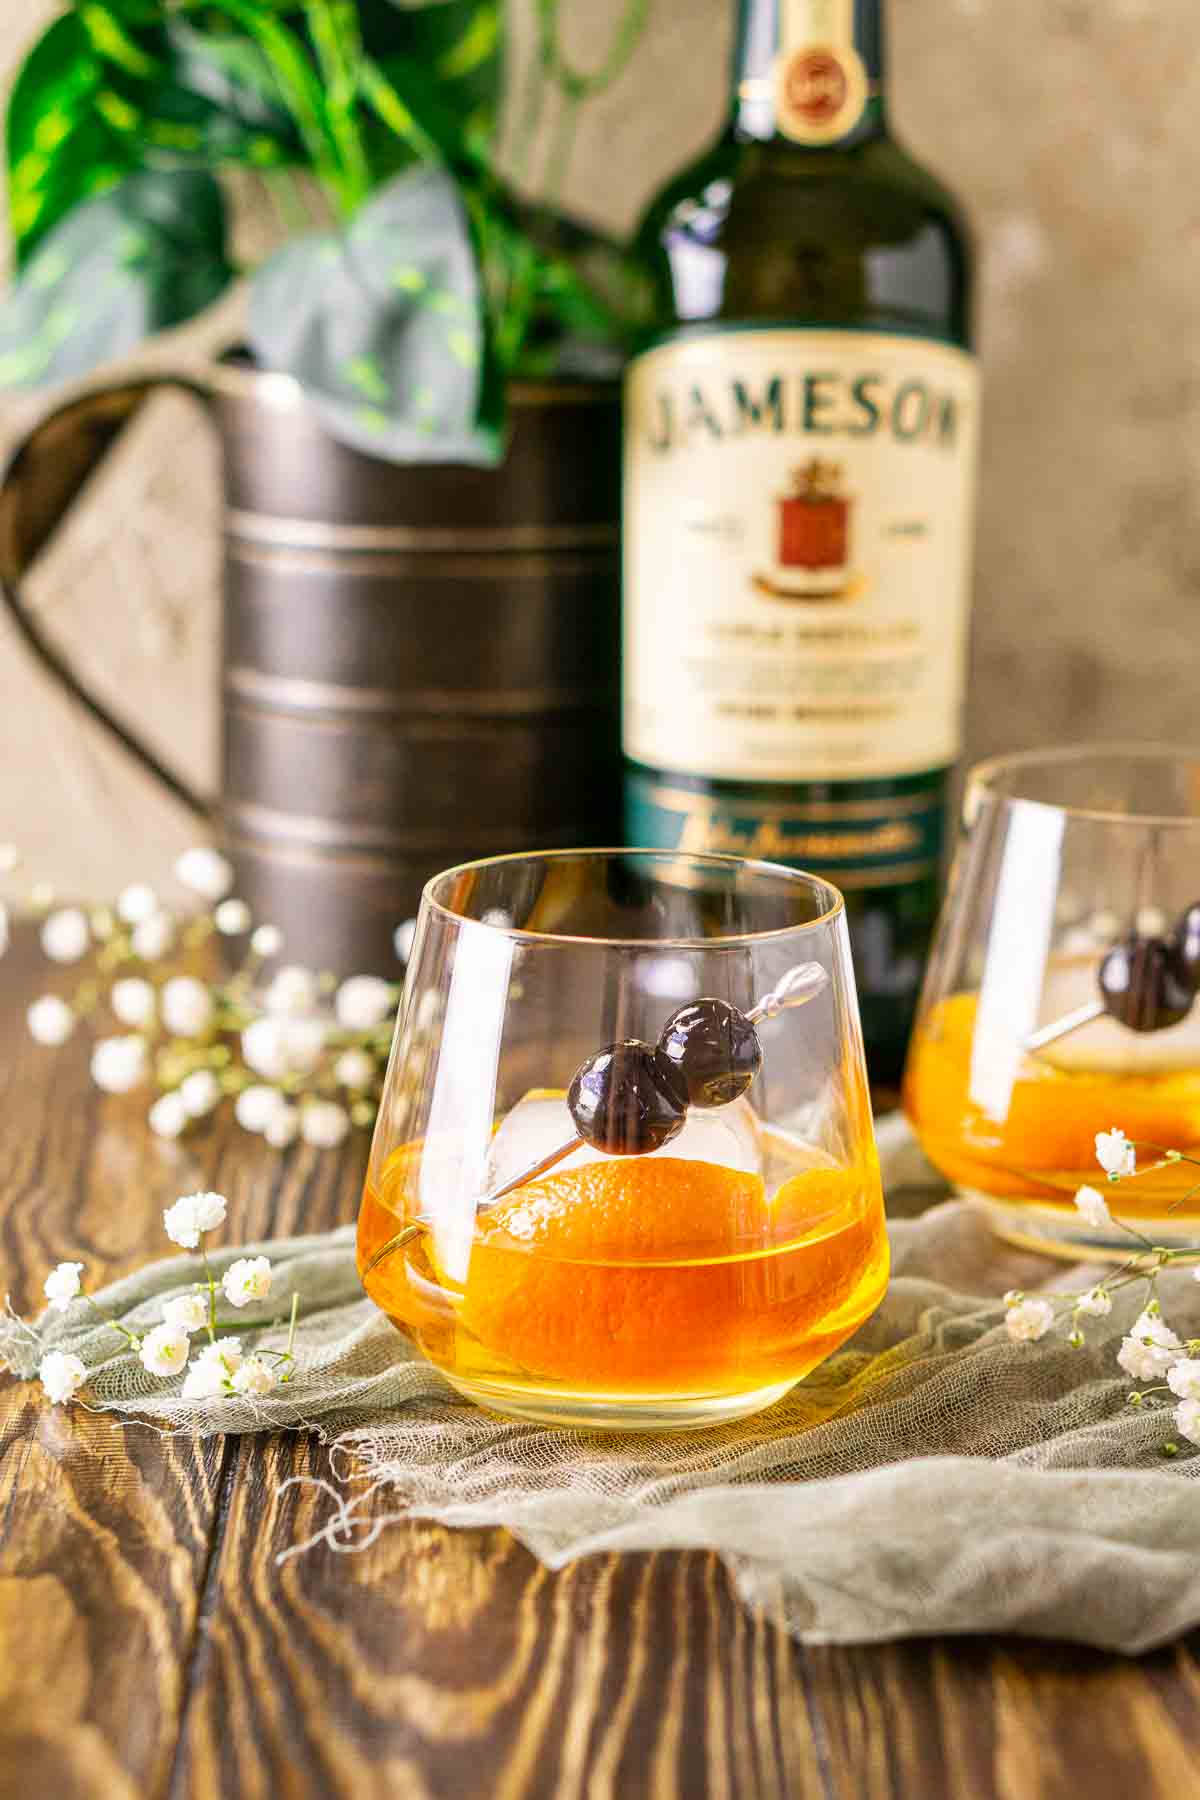 Looking straight on to an Irish old fashioned on a piece of green cloth with white flowers around it on a brown wooden board.